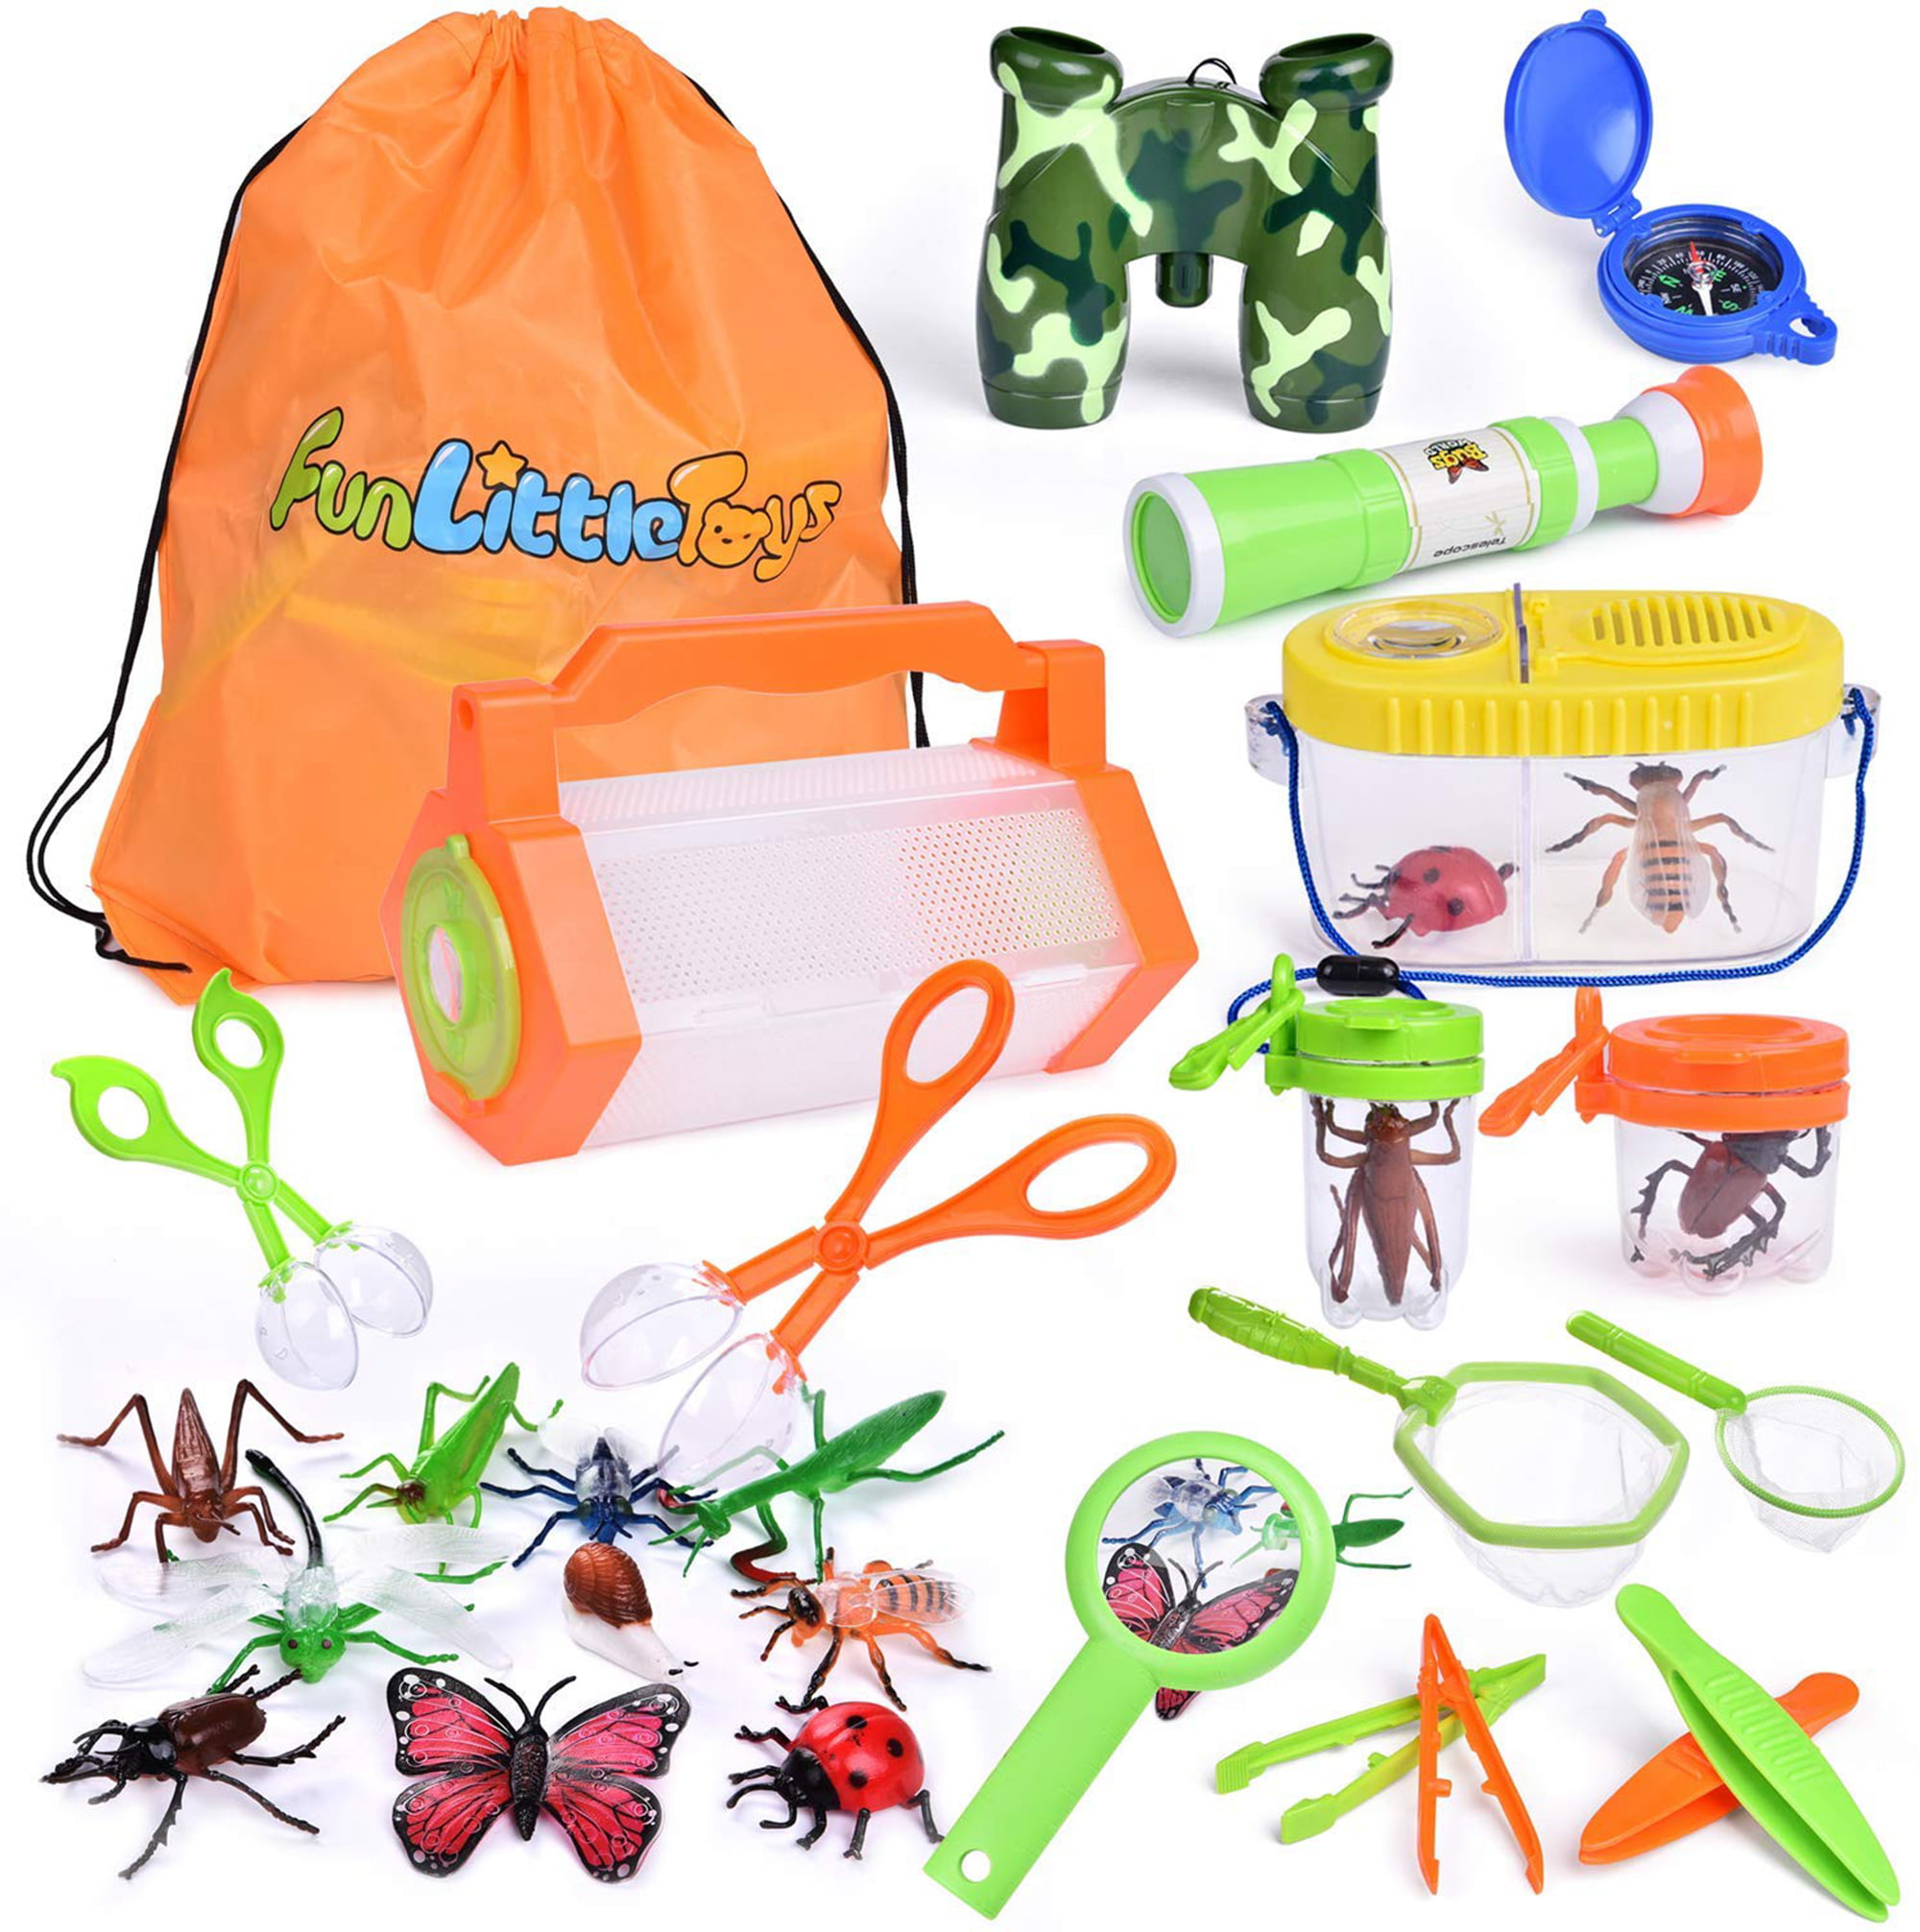 Bug Collection and Kids Explorer Kit Includes Butterfly Net RESTCLOUD Educational Bug Catcher Kit for Kids Bug Observation Capsule and Magnifying Glass Science Toy for Boys and Girls 